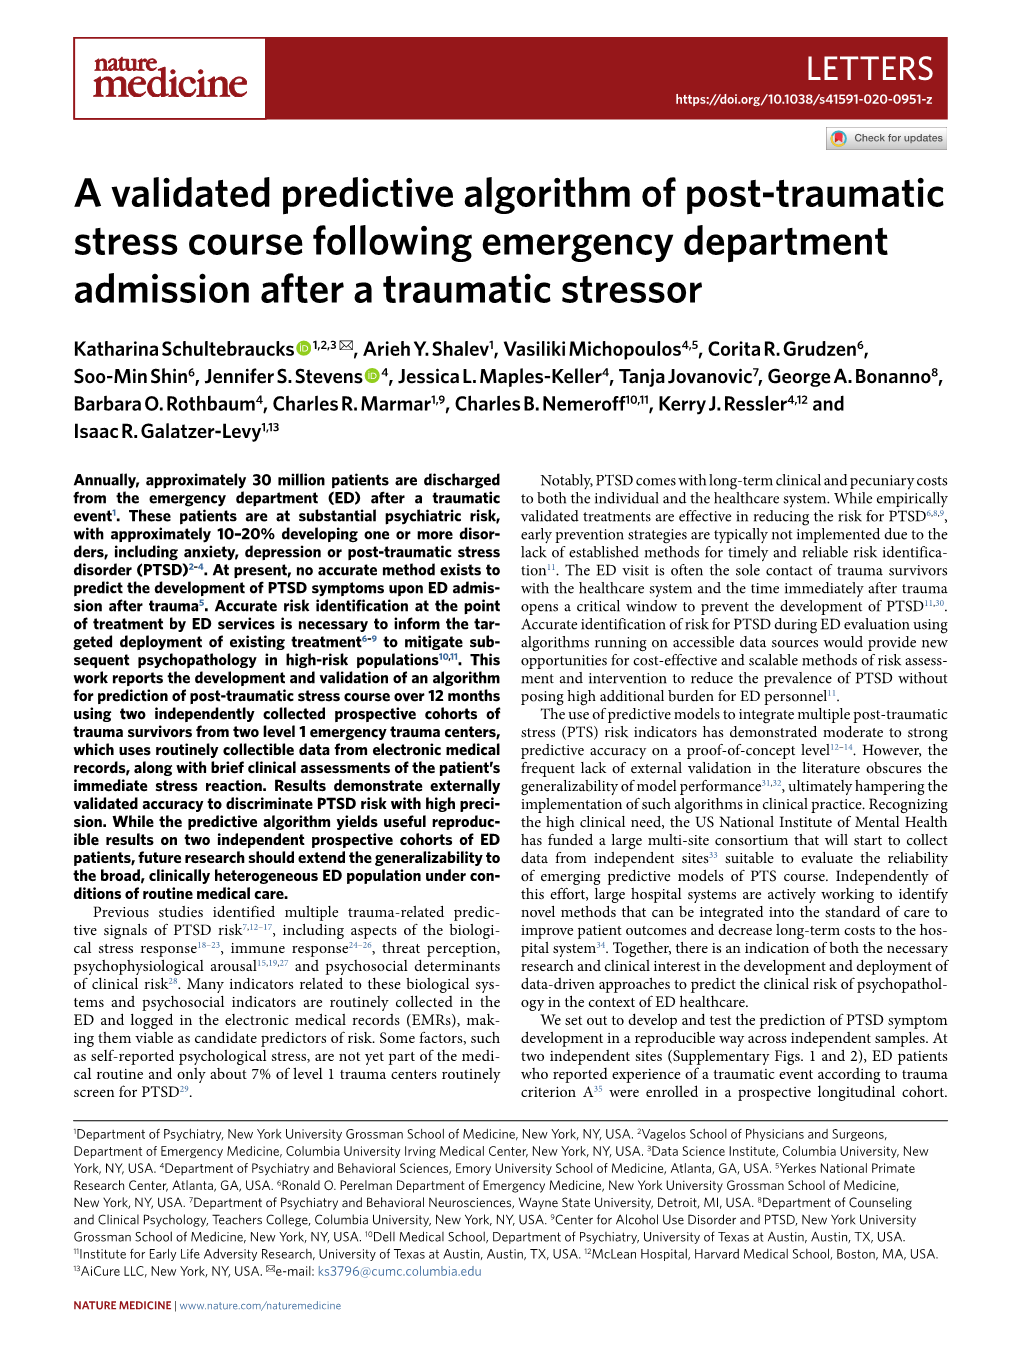 A Validated Predictive Algorithm of Post-Traumatic Stress Course Following Emergency Department Admission After a Traumatic Stressor